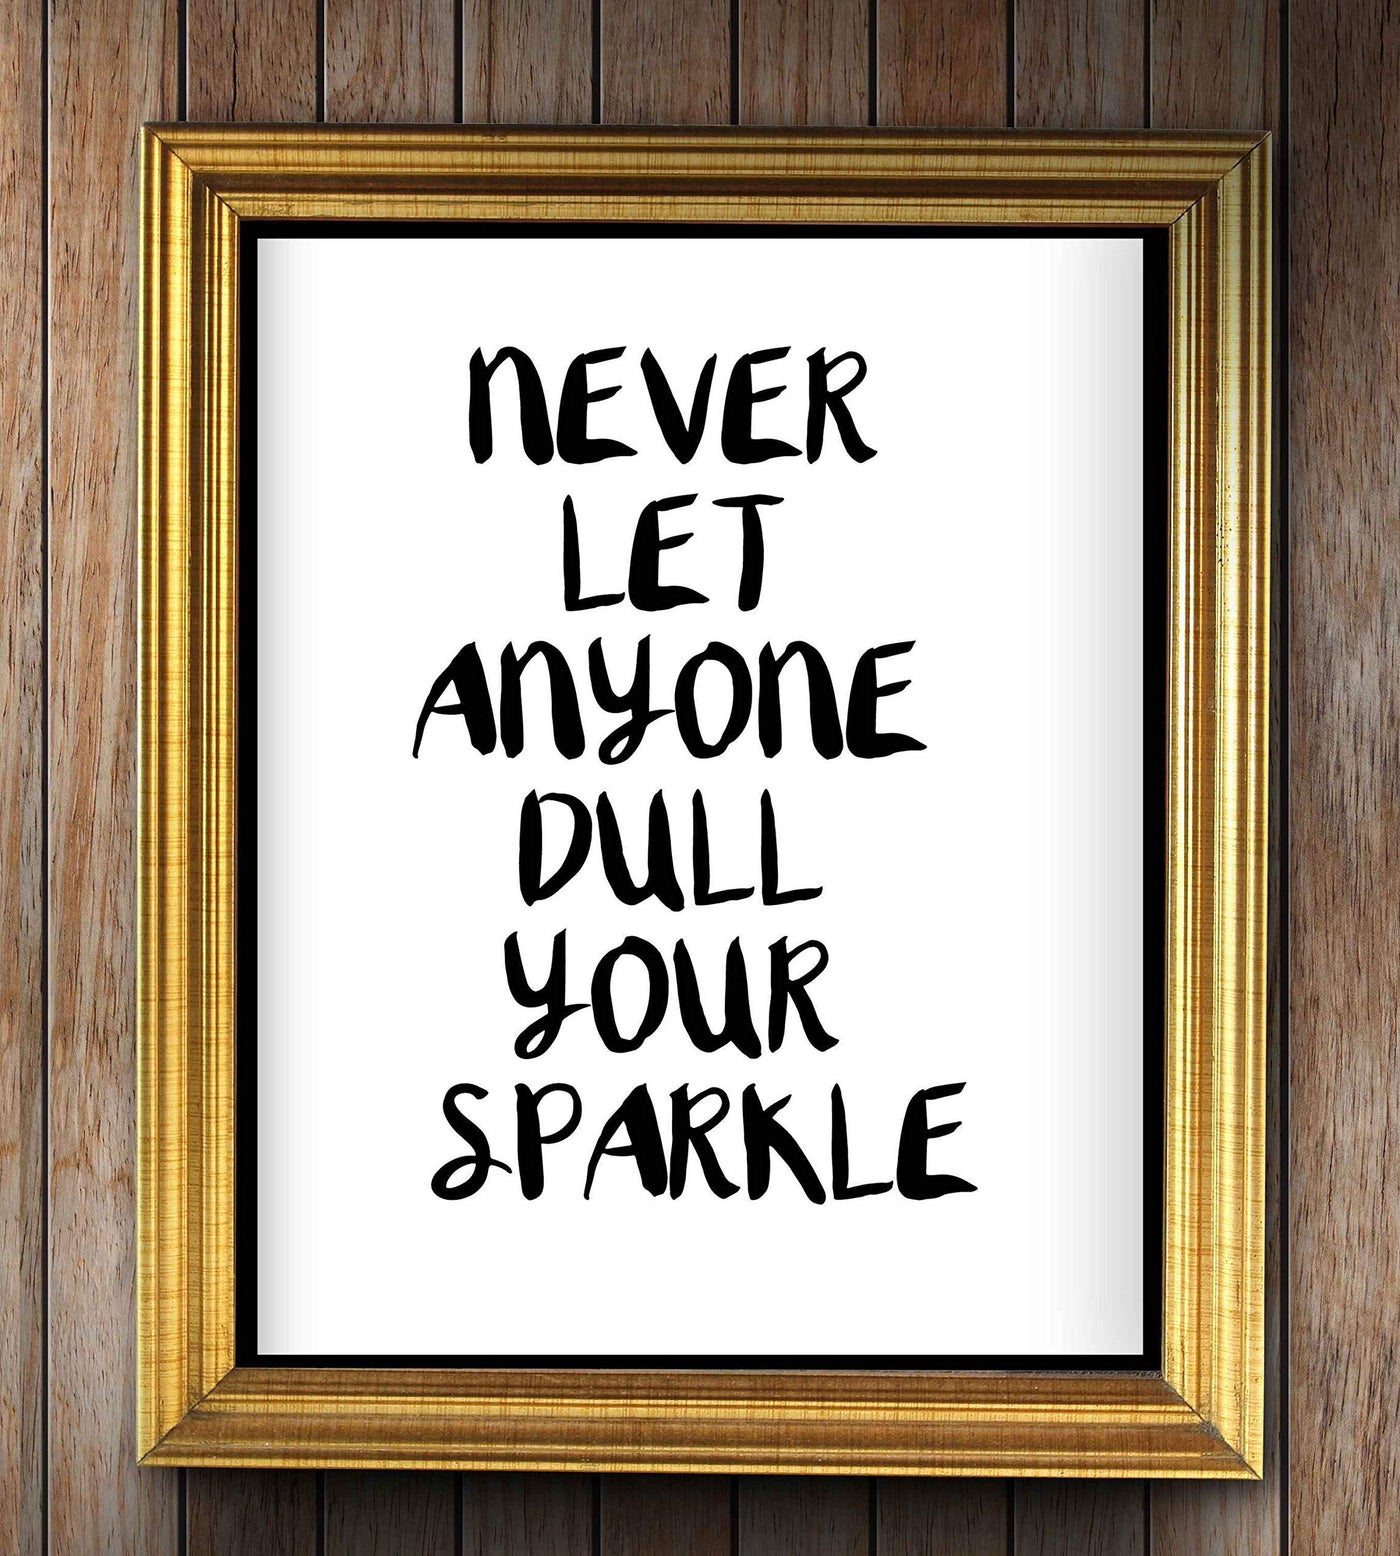 Never Let Anyone Dull Your Sparkle Inspirational Quotes Wall Sign-8 x 10" Modern Typographic Art Print-Ready to Frame. Home-Office-Studio-Desk-School Decor. Great Motivational Gift. Just Be You!